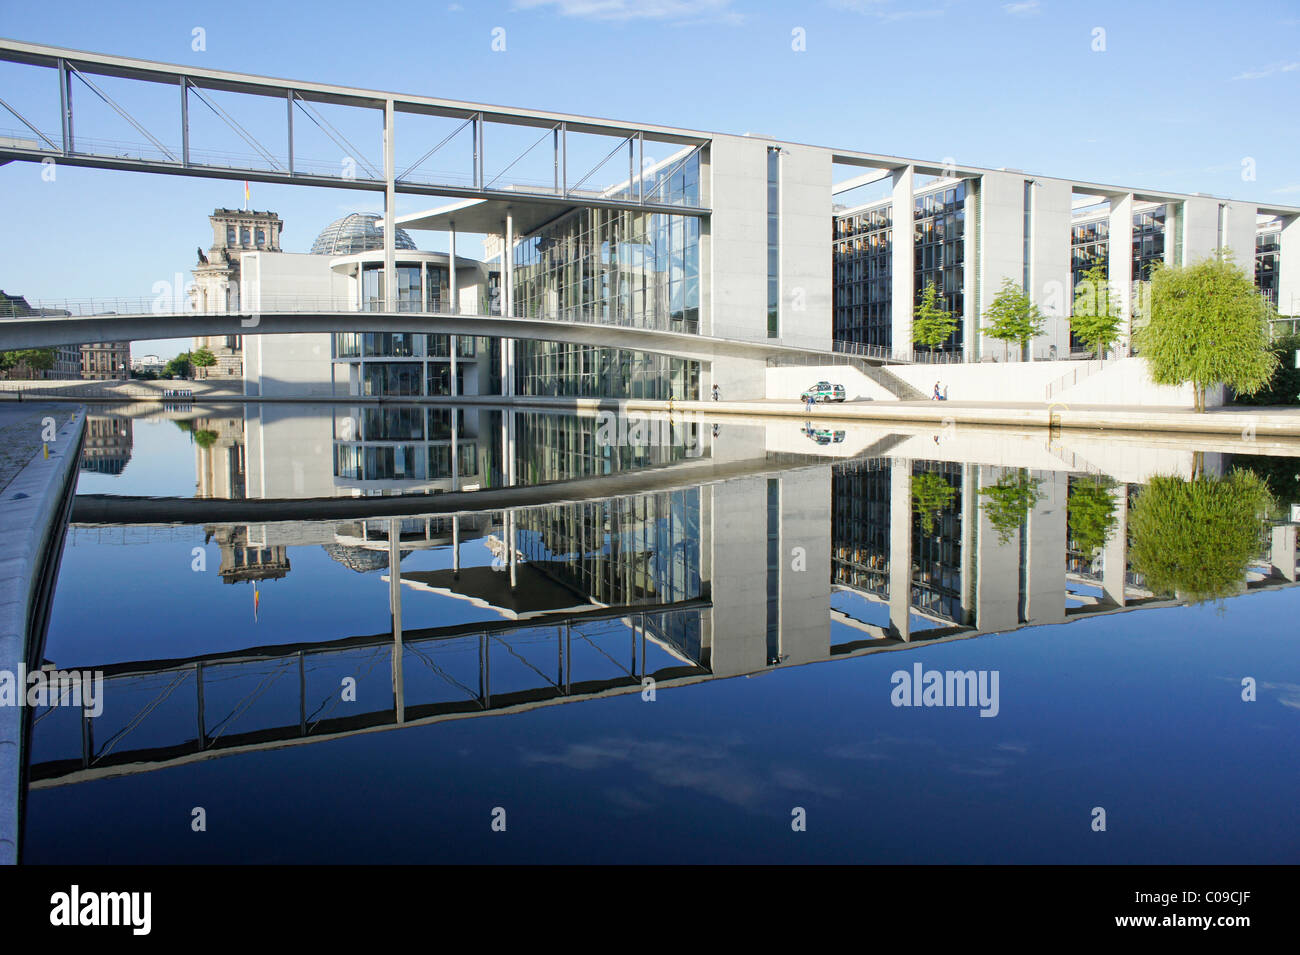 Paul-Loebe-Haus government building on the Spree river, Regierungsviertel government district, Berlin, Germany, Europe Stock Photo